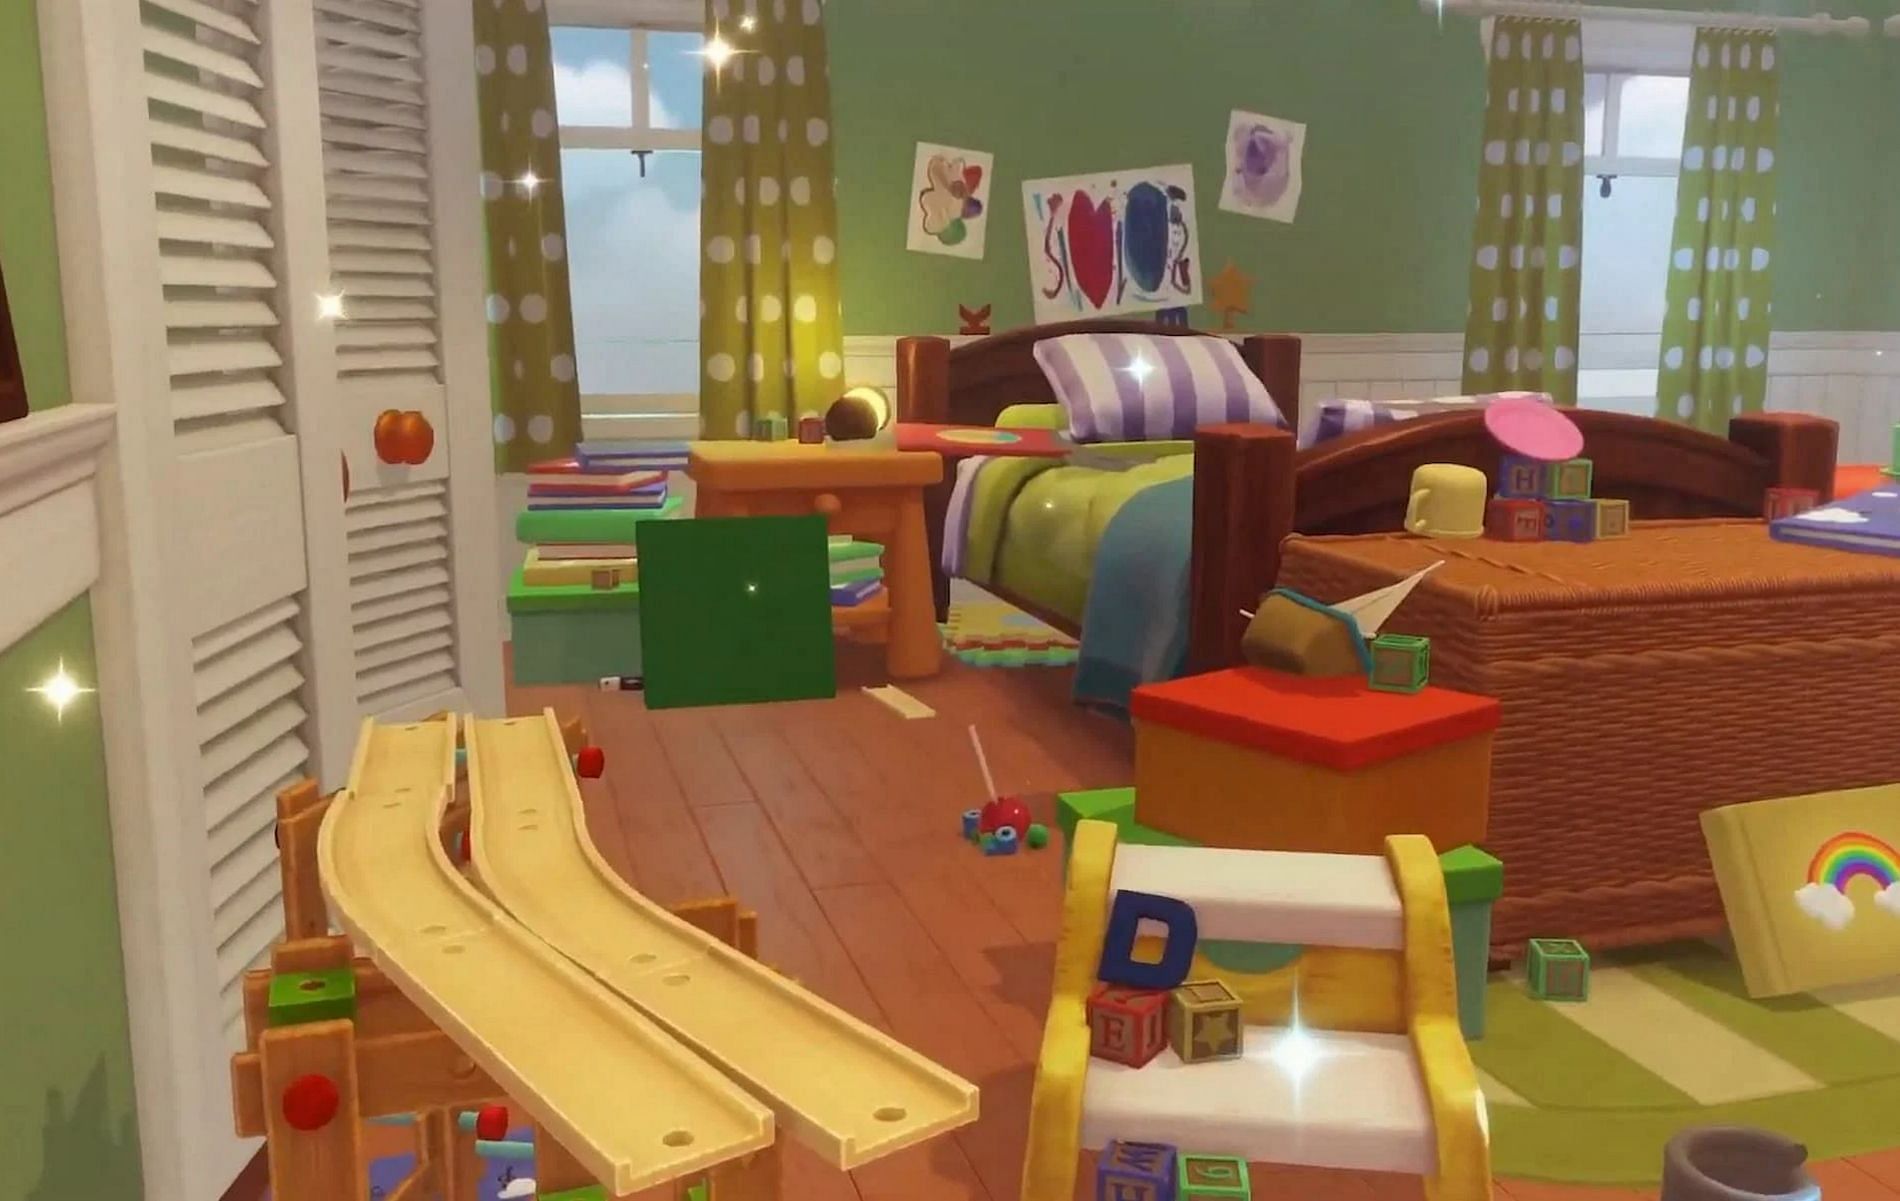 Unlocking and accessing the Toy Story Realm in Disney Dreamlight Valley (Image via Disney Dreamlight Valley)